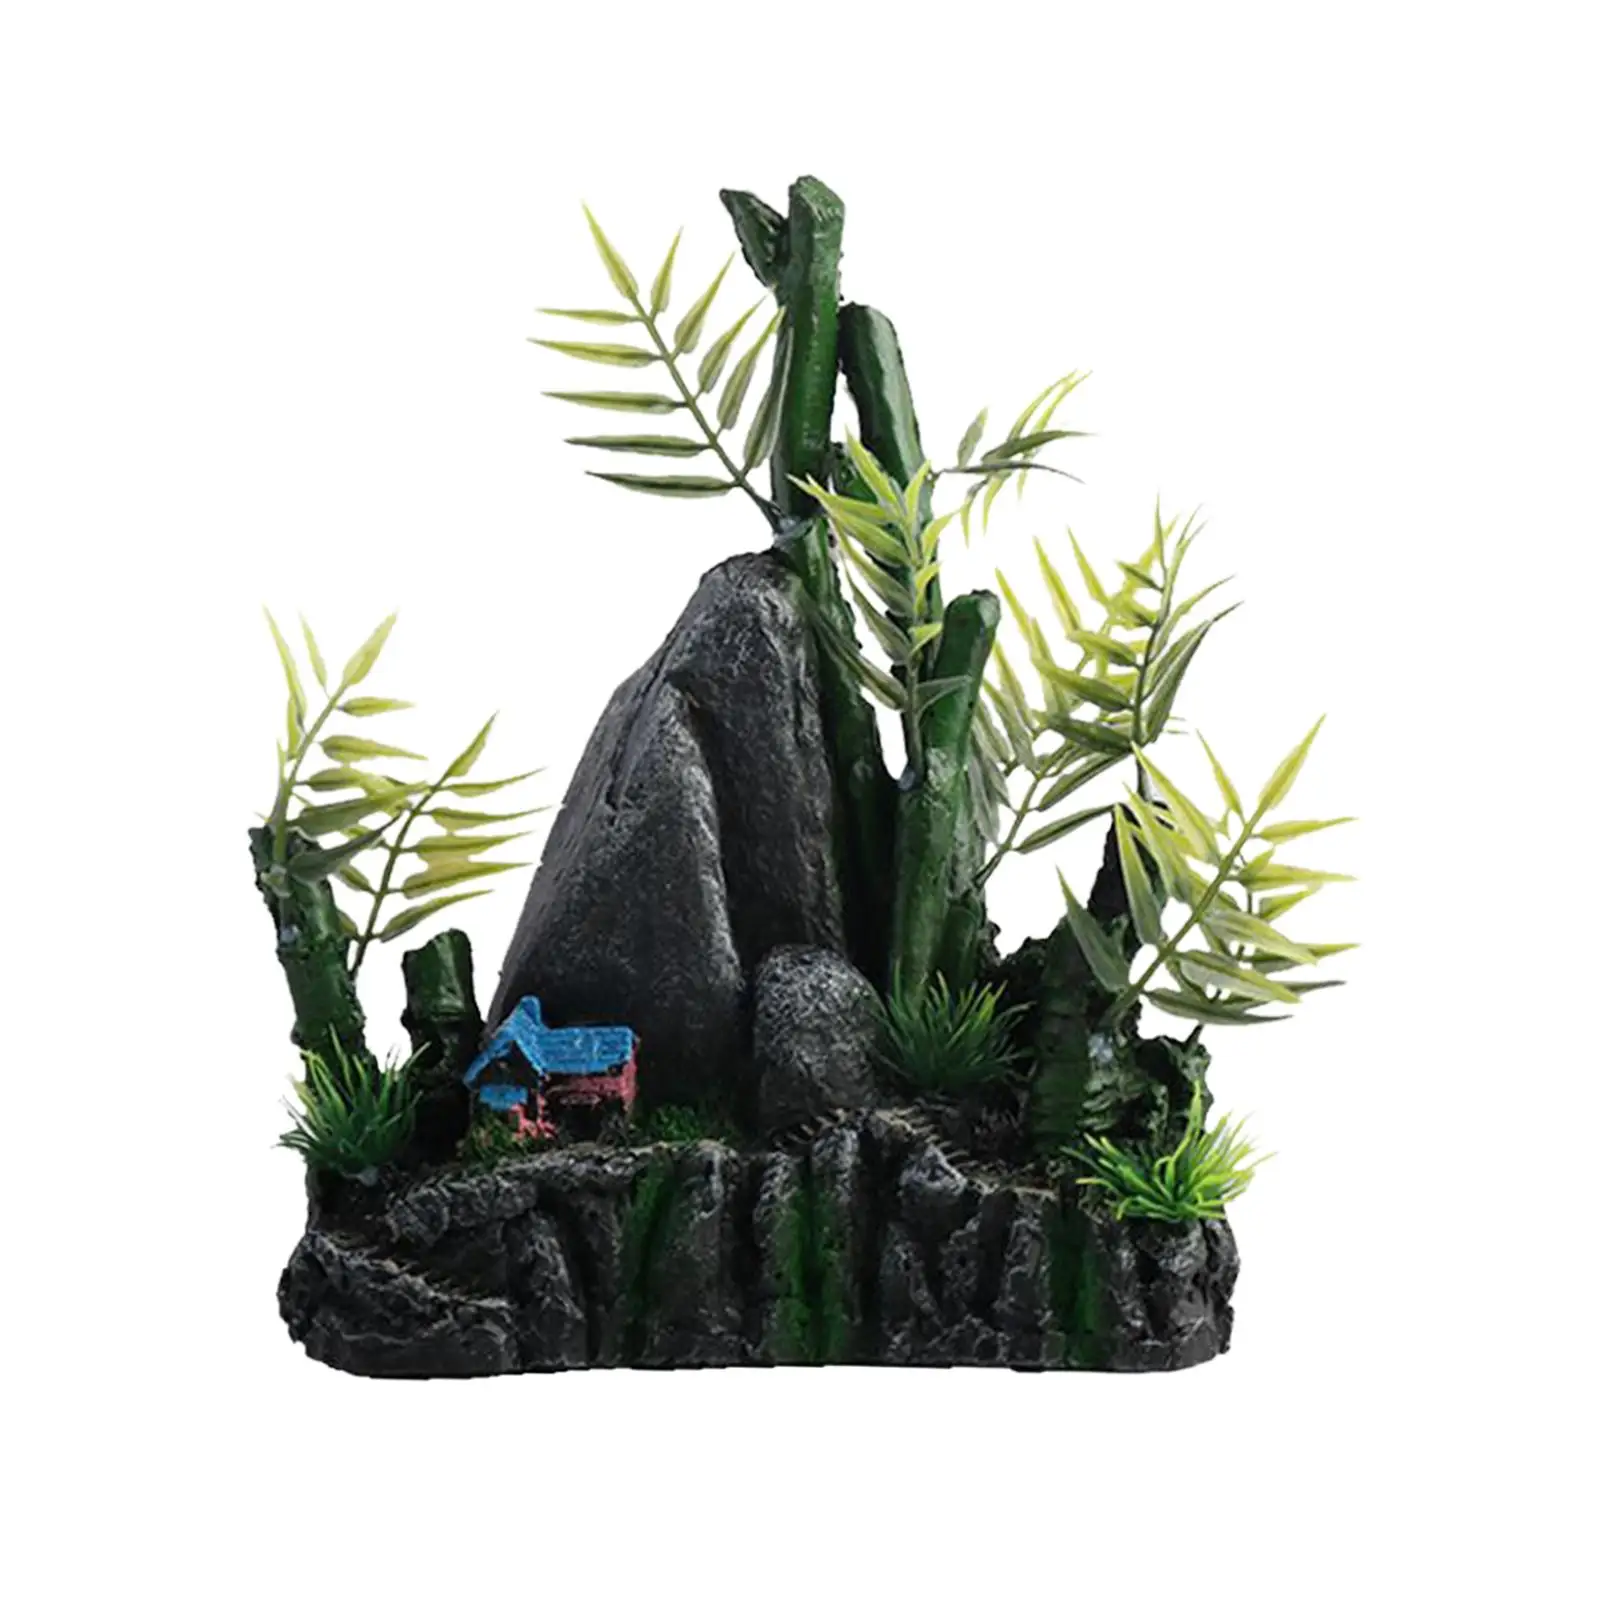 Aquarium Decoration Crafts Tree Bamboo Simulation Fish Tank Landscaping Rockery Landscape Stone for Living Room Decor Collection